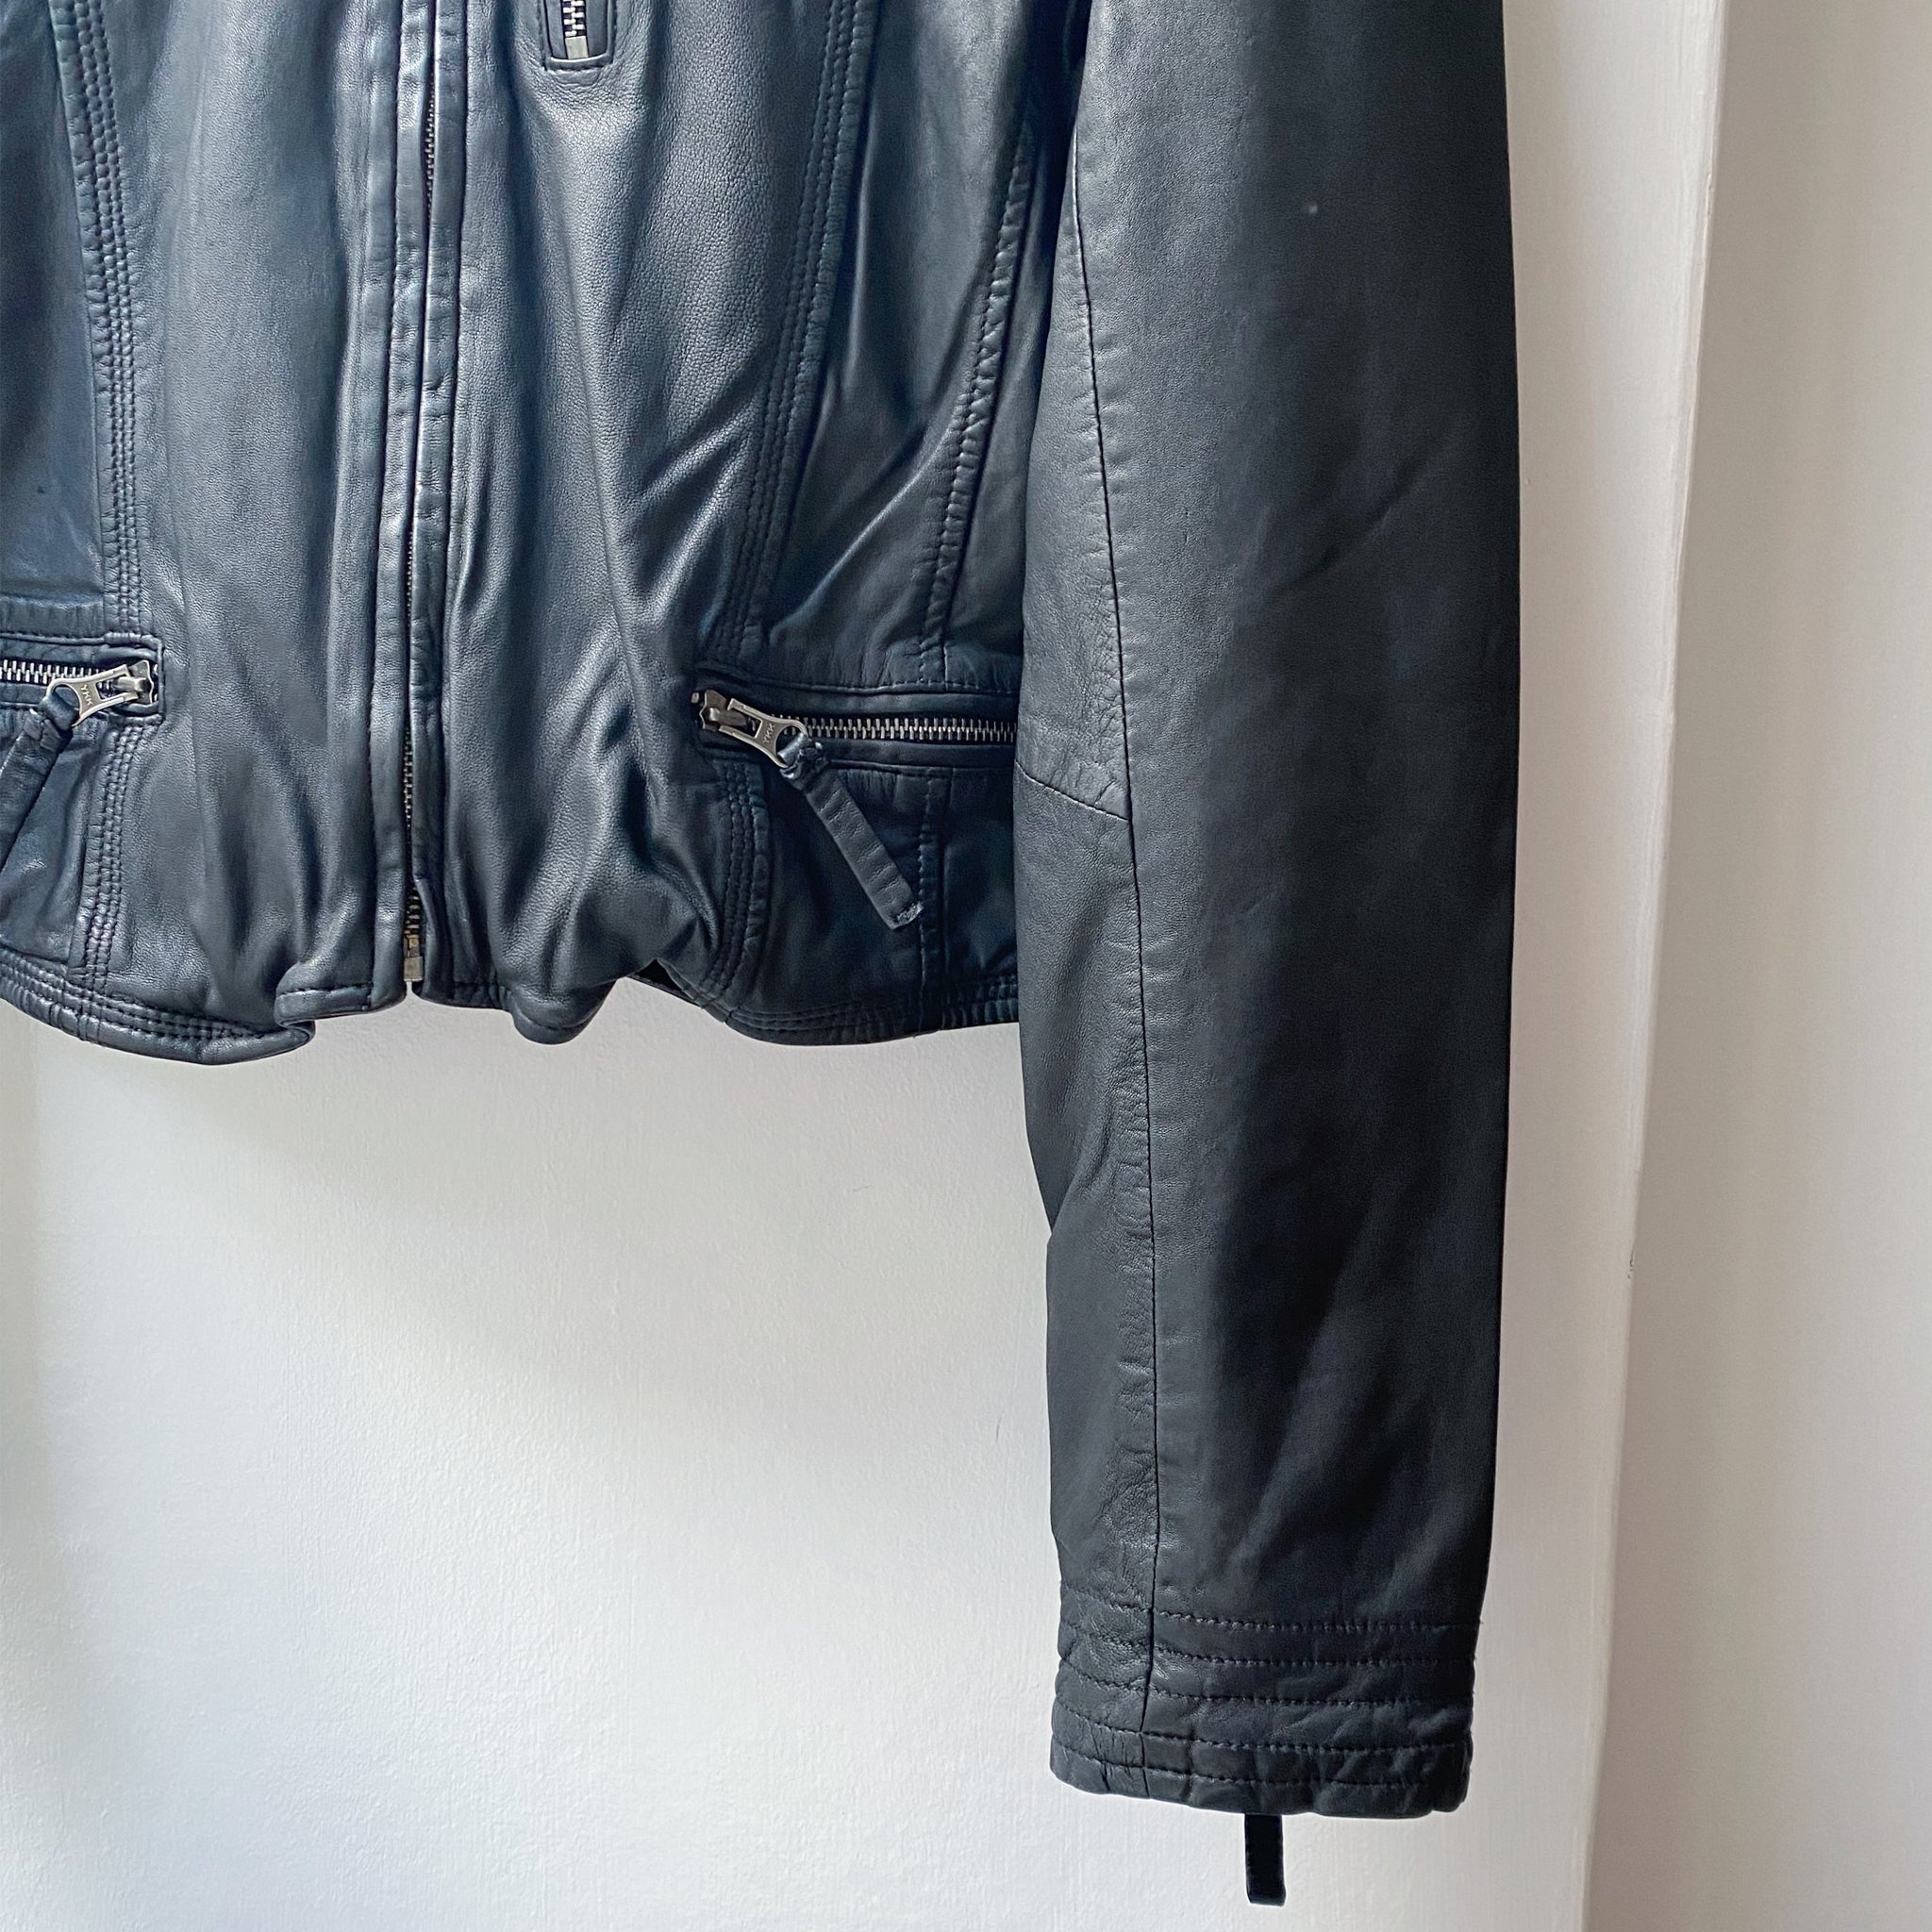 A fitted MDK black Leather Rucy Jacket hanging on a wall.